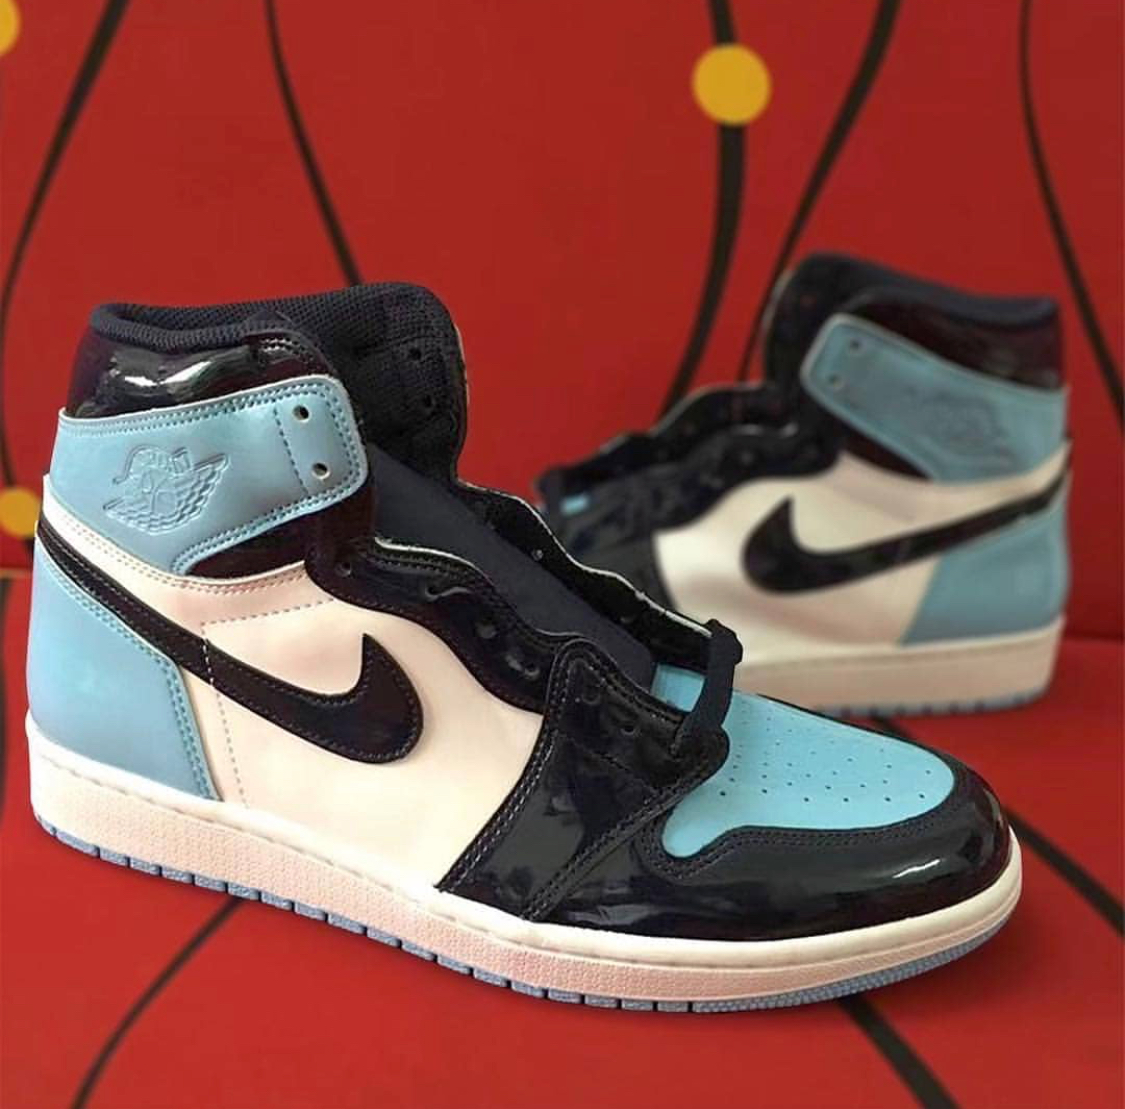 jordan 1 baby blue and red